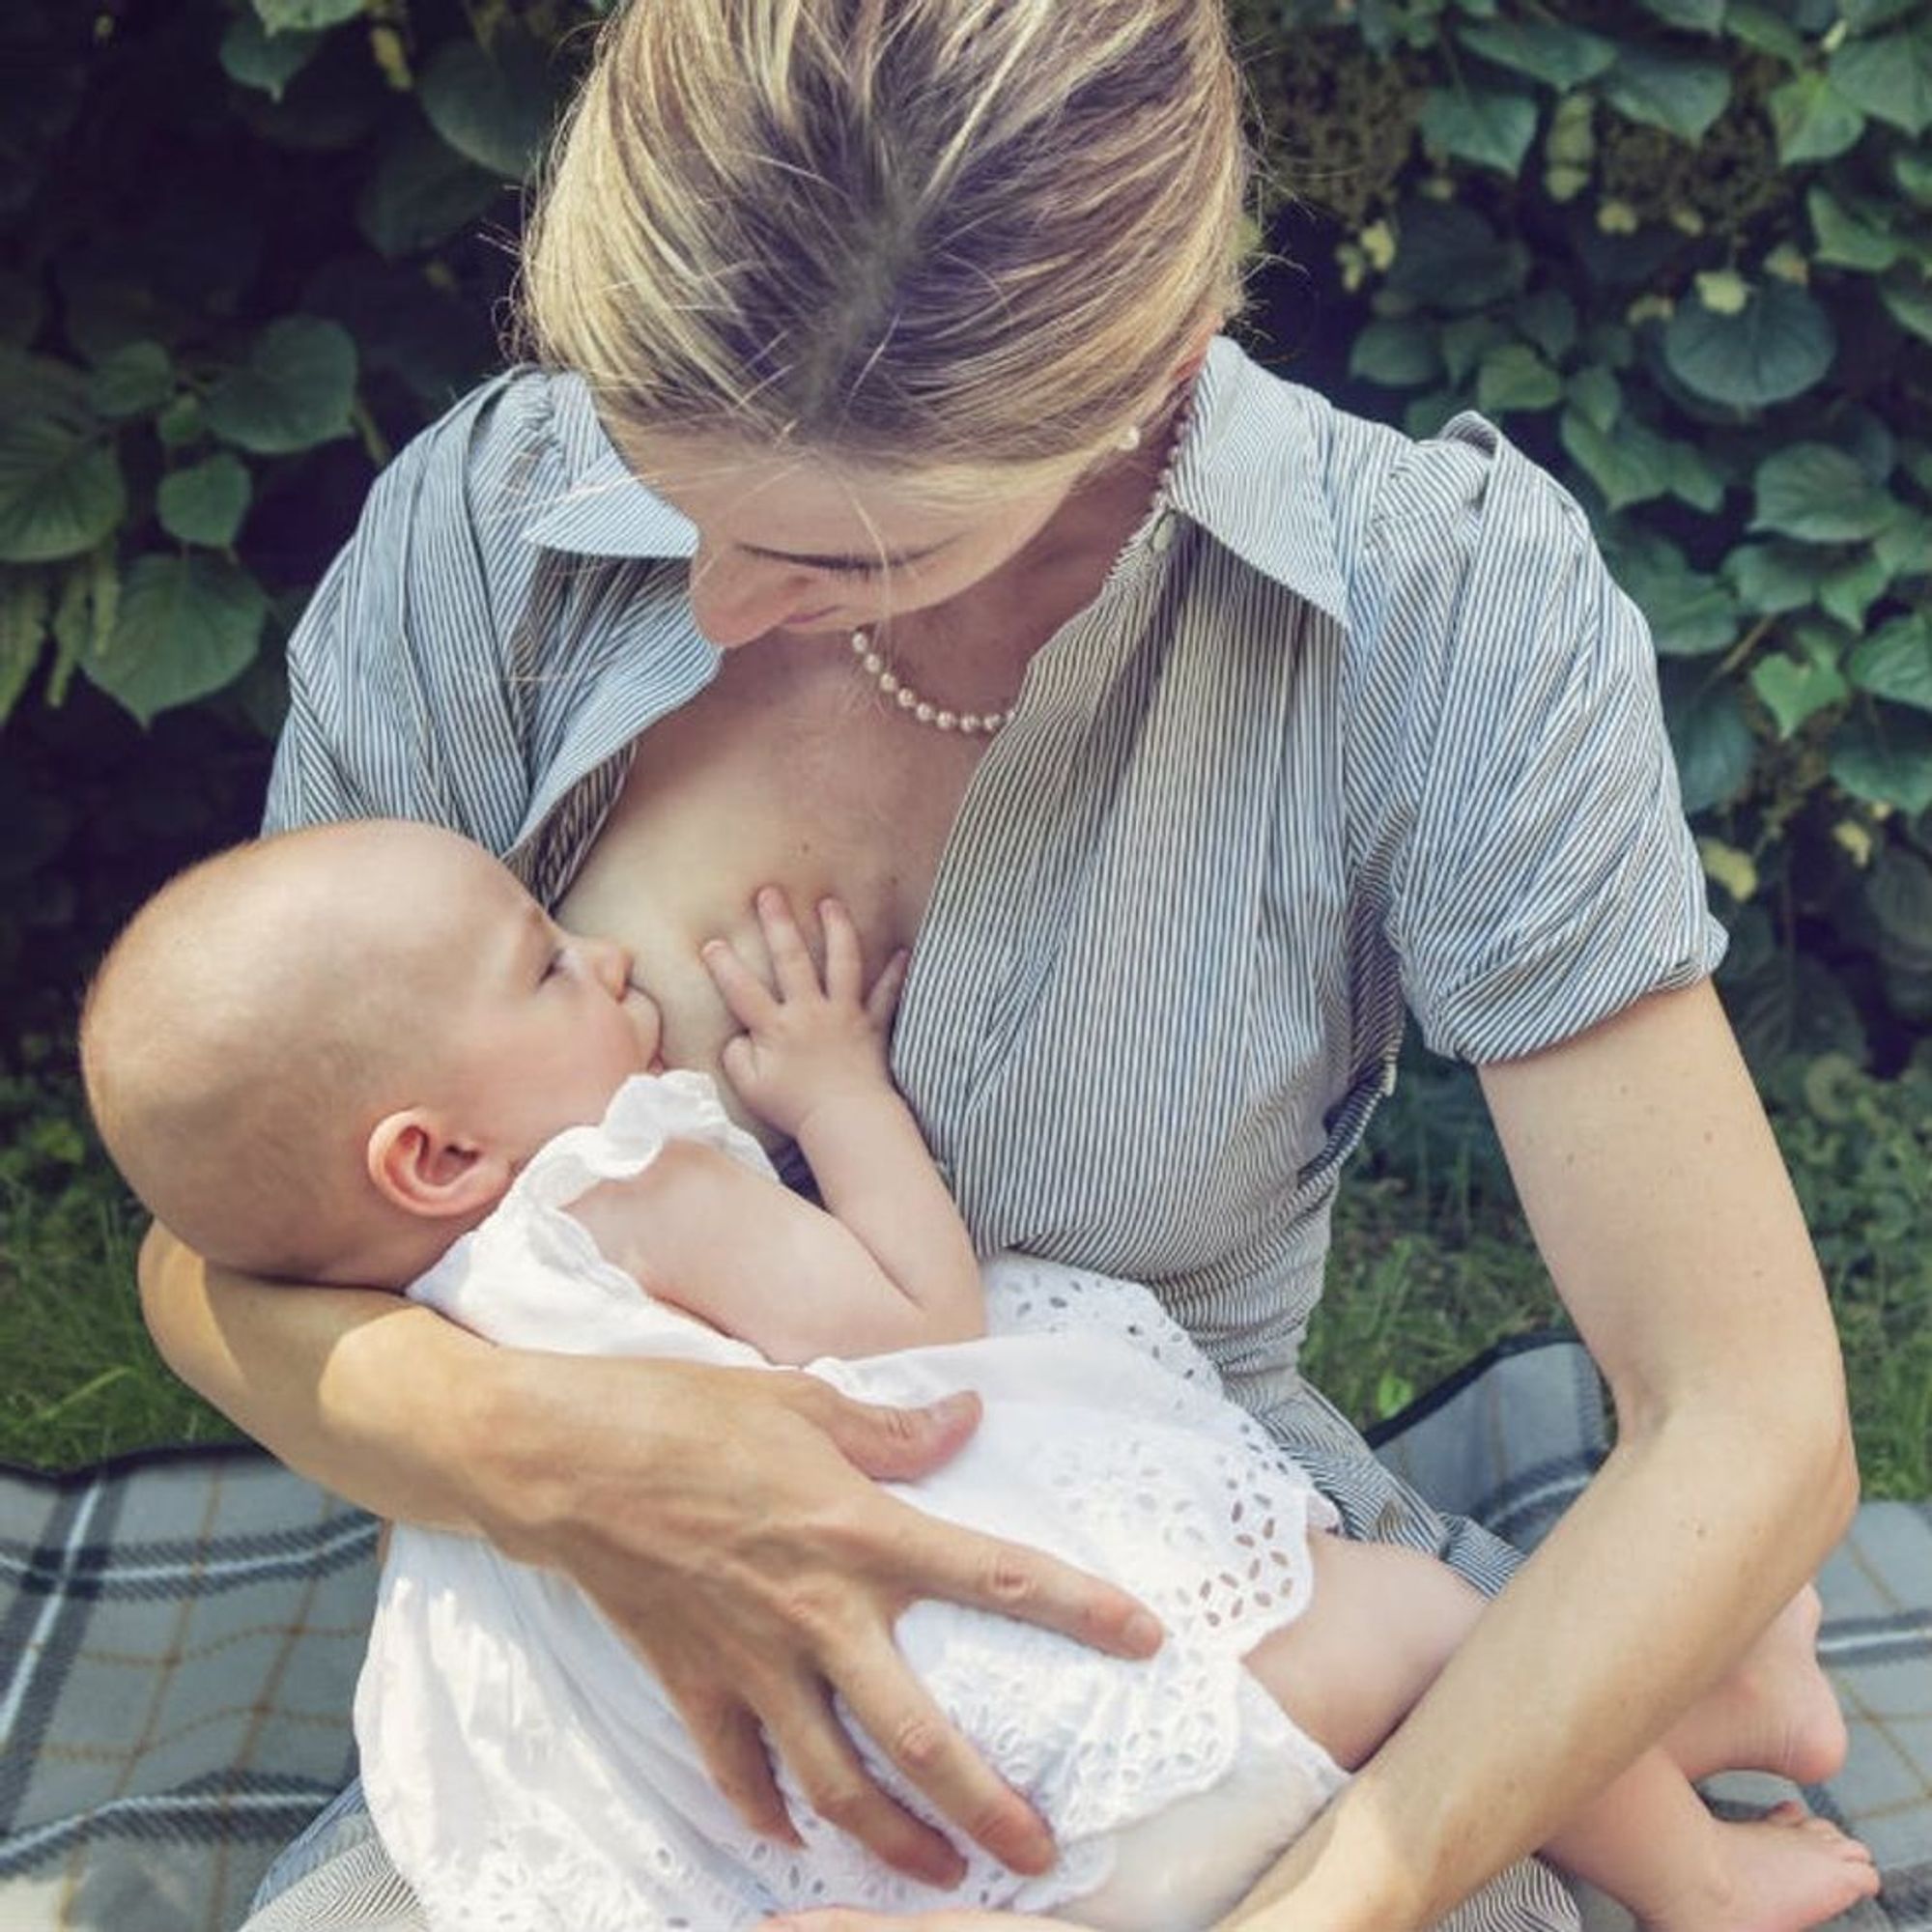 Will extended breastfeeding impact my ability to get 